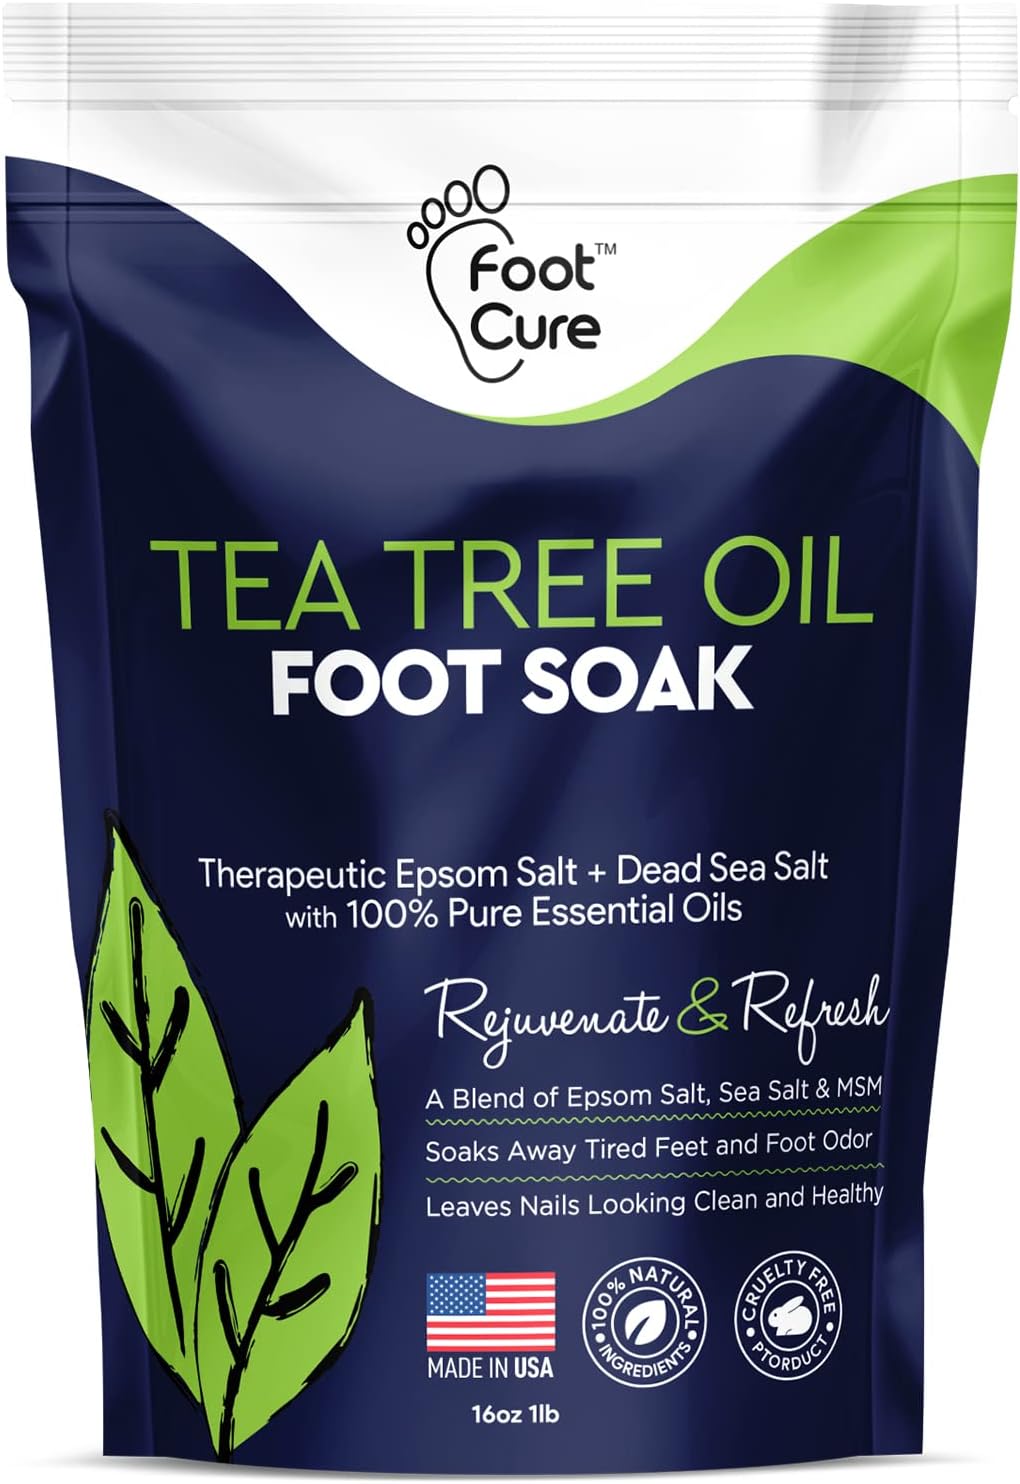 Tea Tree Oil Foot Soak with Epsom Salt - For Toenail Repair, Athletes Foot, Softens Calluses, Soothes Sore & Tired Feet, Nail Discoloration, odor Scent, Spa Pedicure Care - Made in USA 16